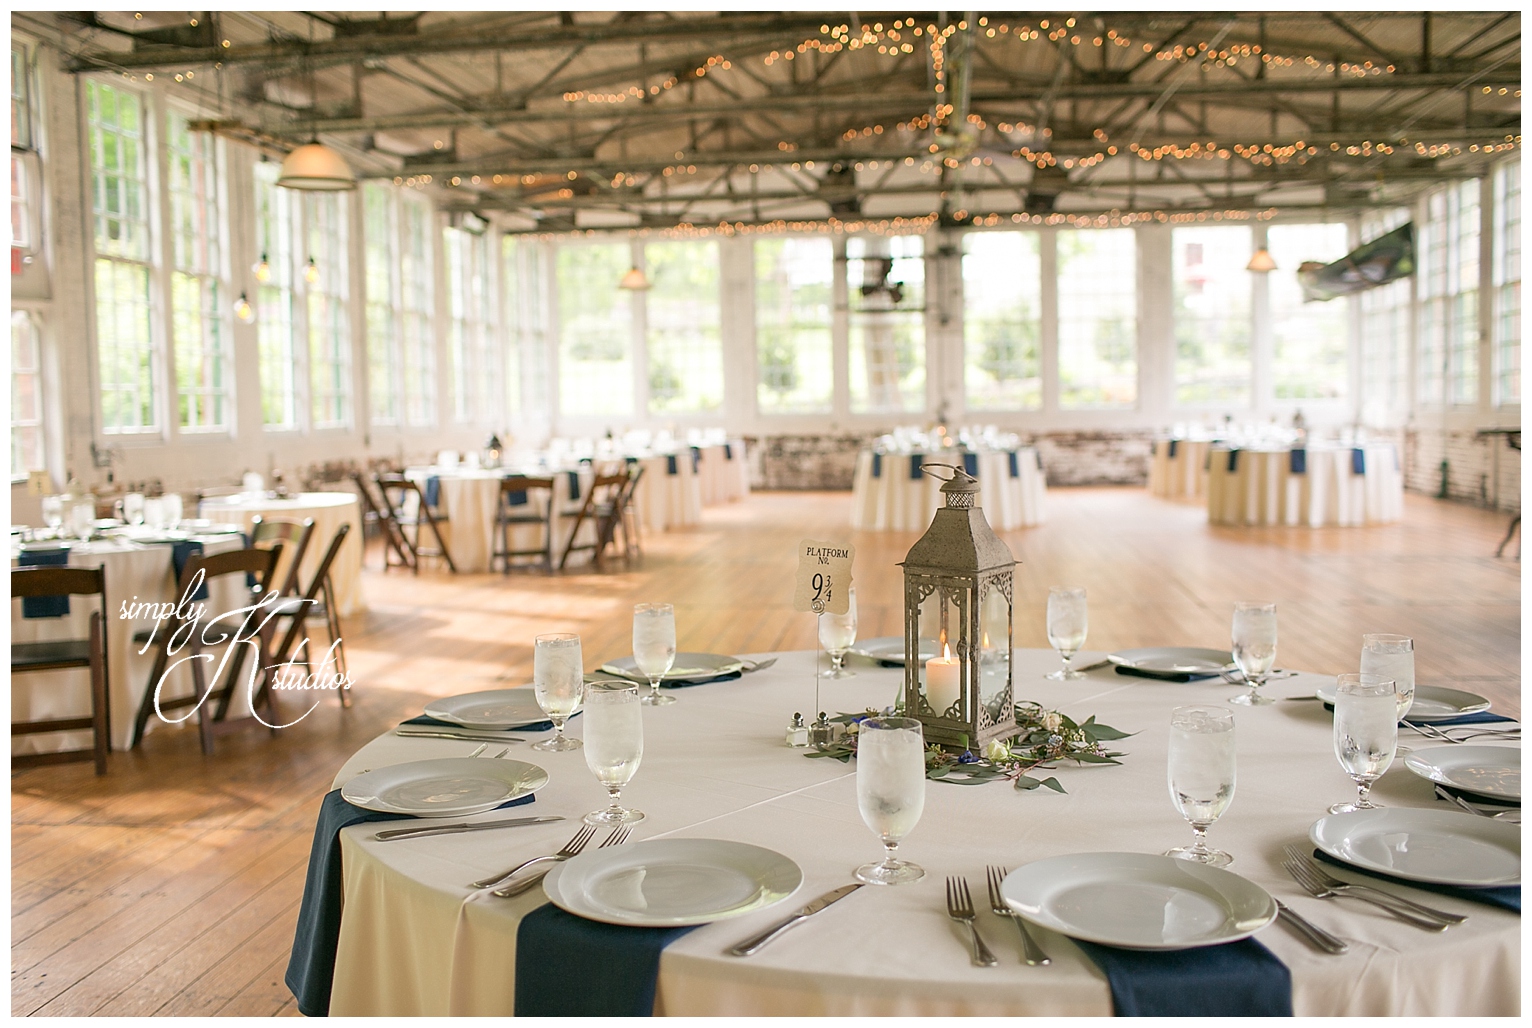 Dinner Setup at The Lace Factory.jpg